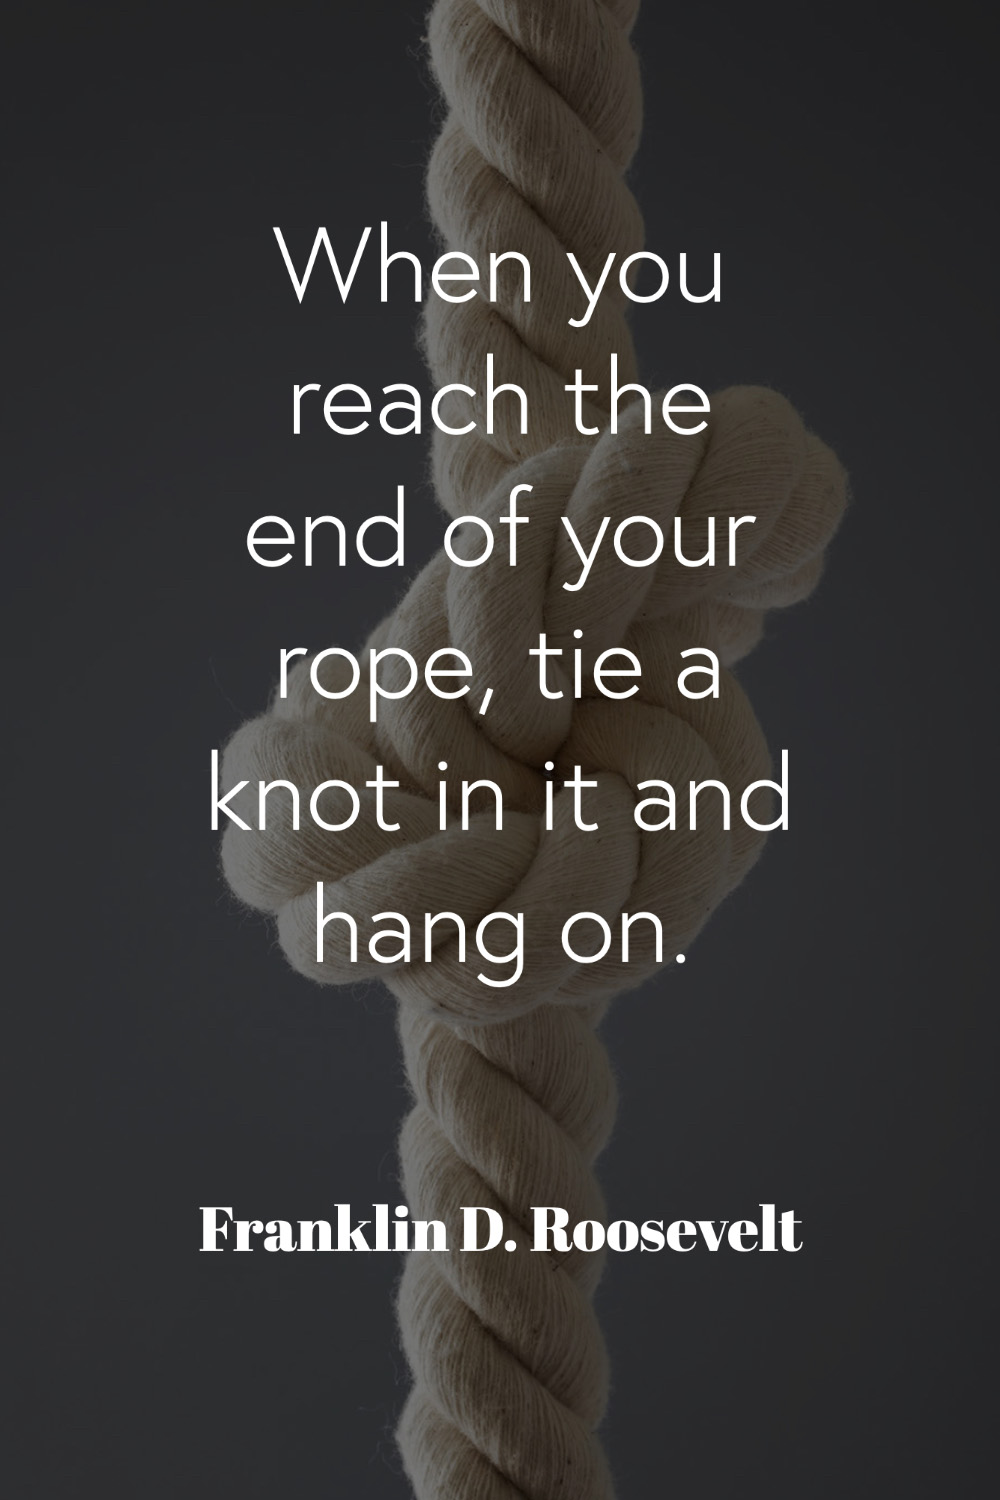 Quote by Franklin D. Roosevelt